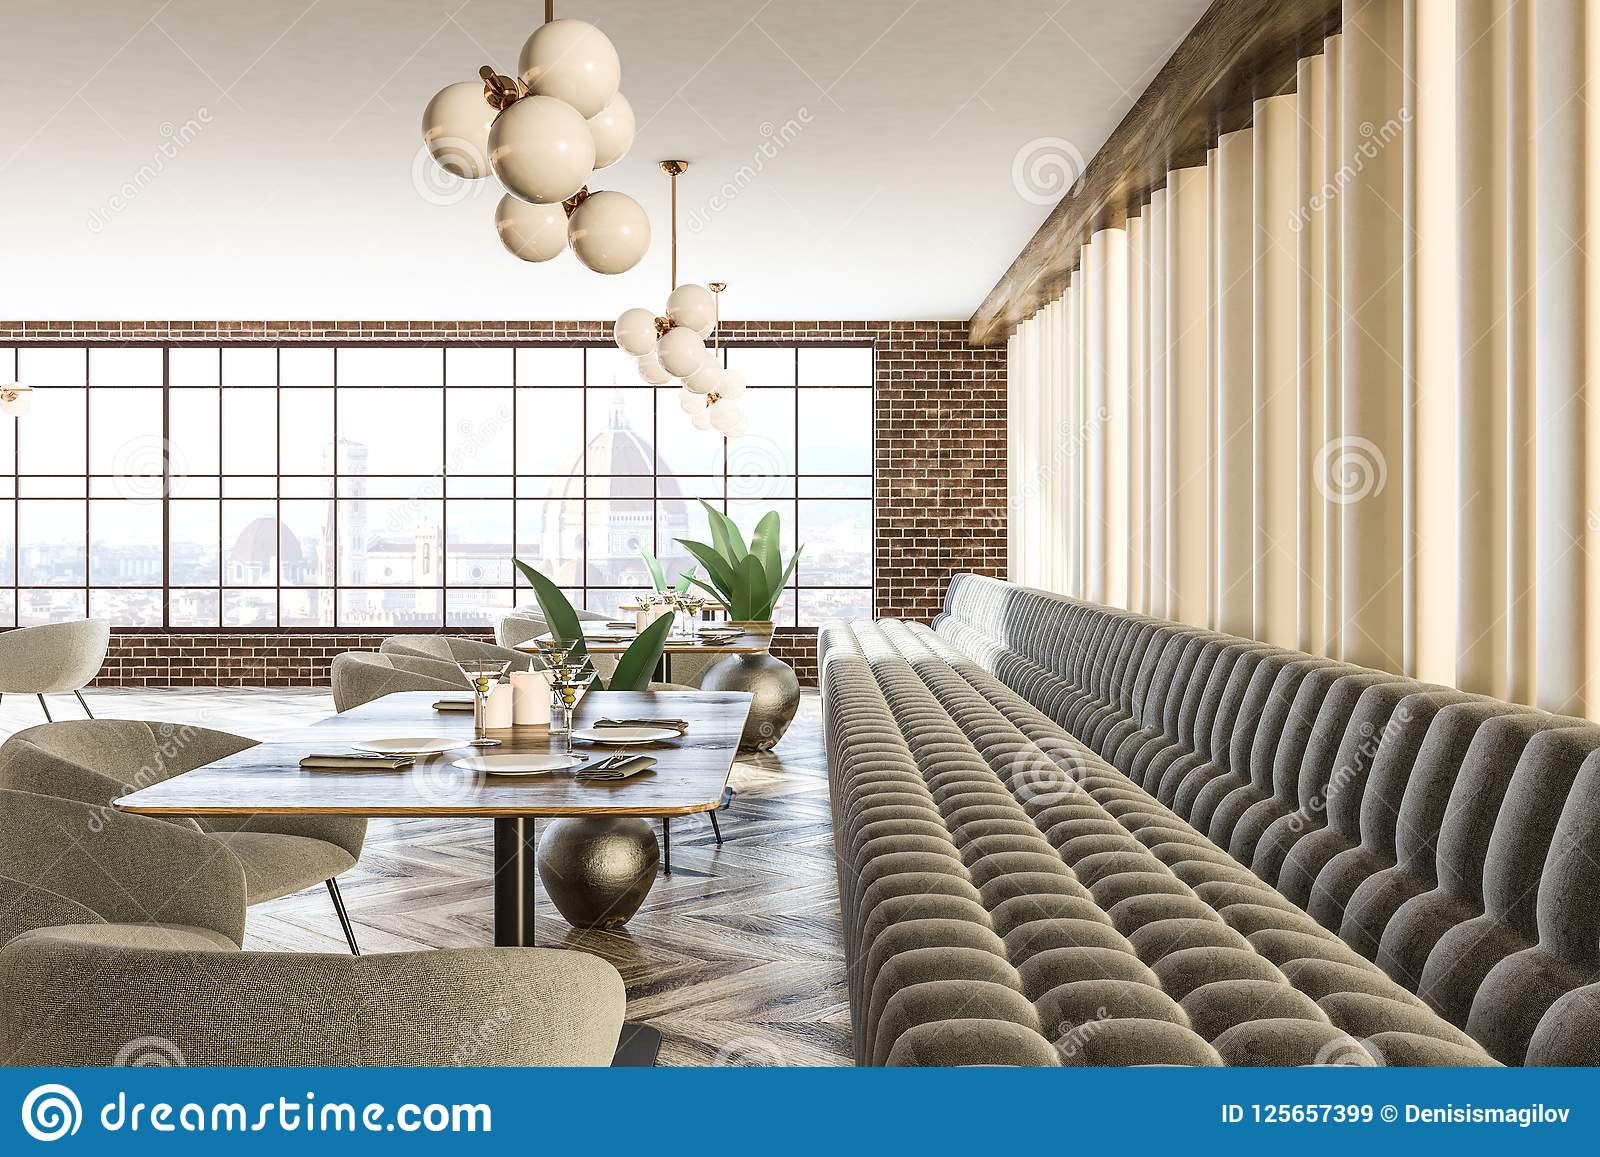 Brick wall gray sofas and armchairs cafeteria